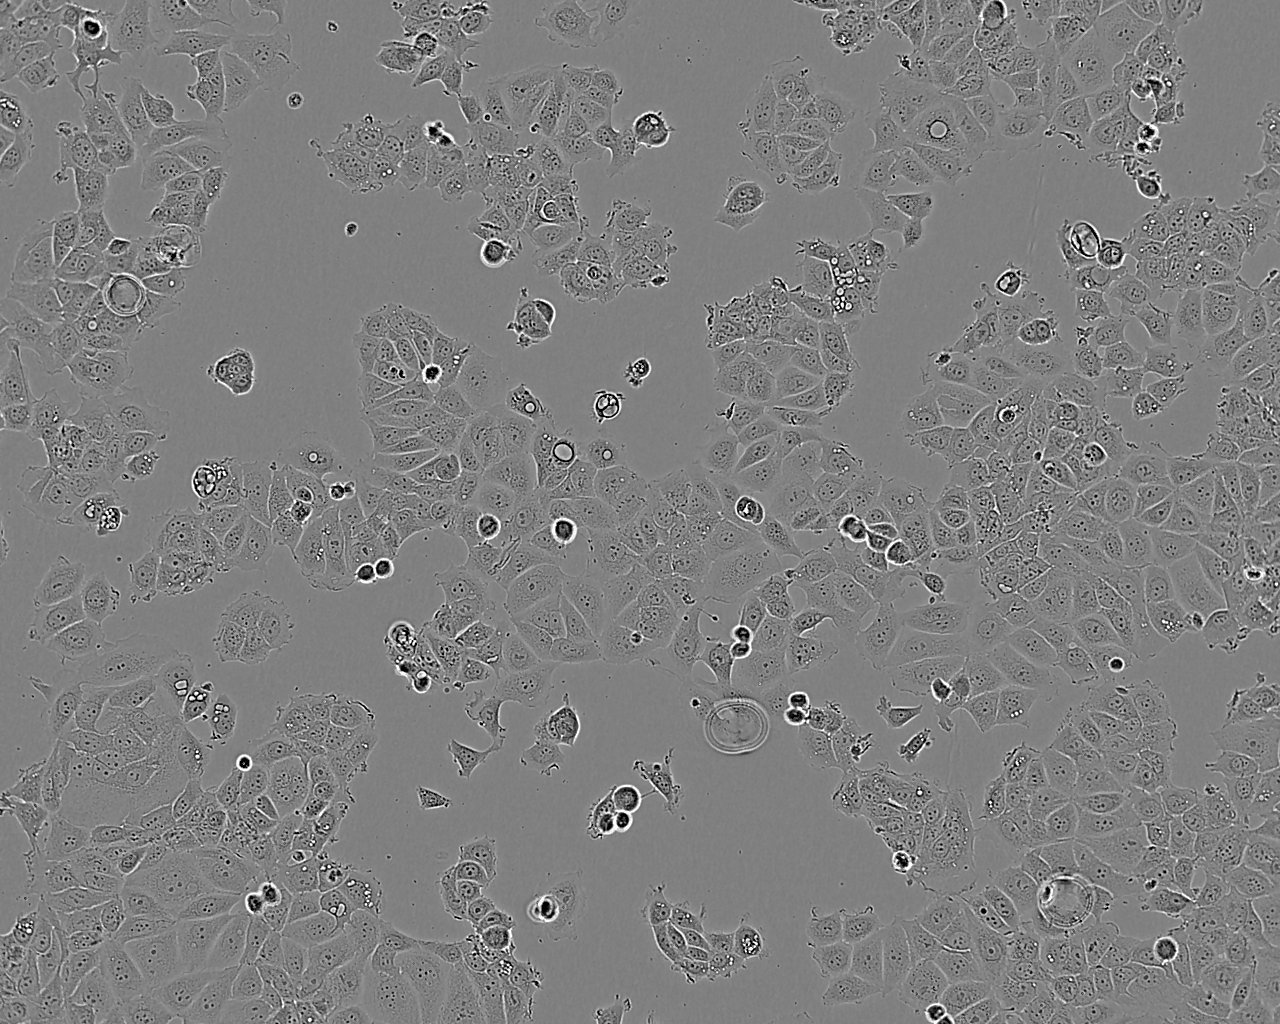 QGY-7703 epithelioid cells人肝癌细胞系,QGY-7703 epithelioid cells